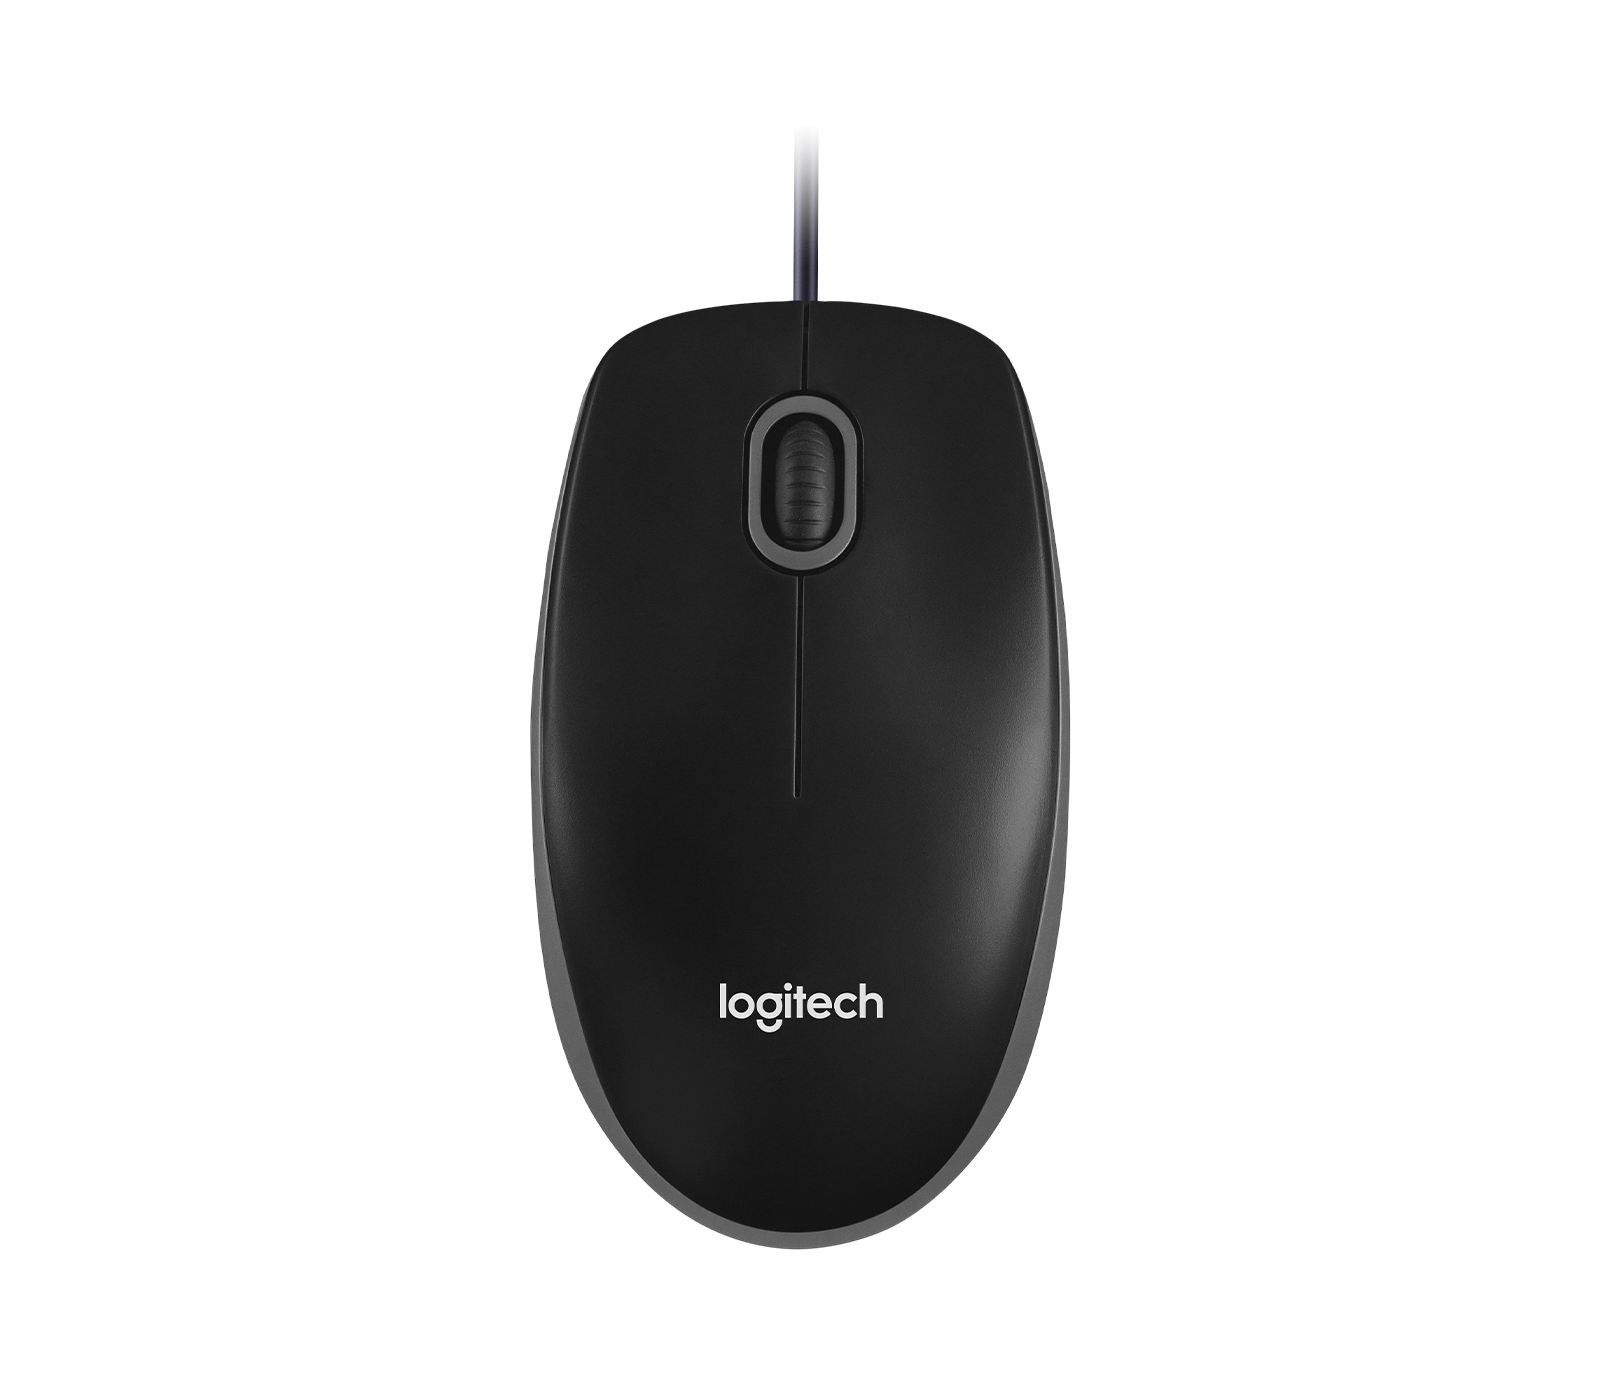 Logitech G1 USB Wired Optical Performance Gaming Mouse Mice for Laptop PC Mac 